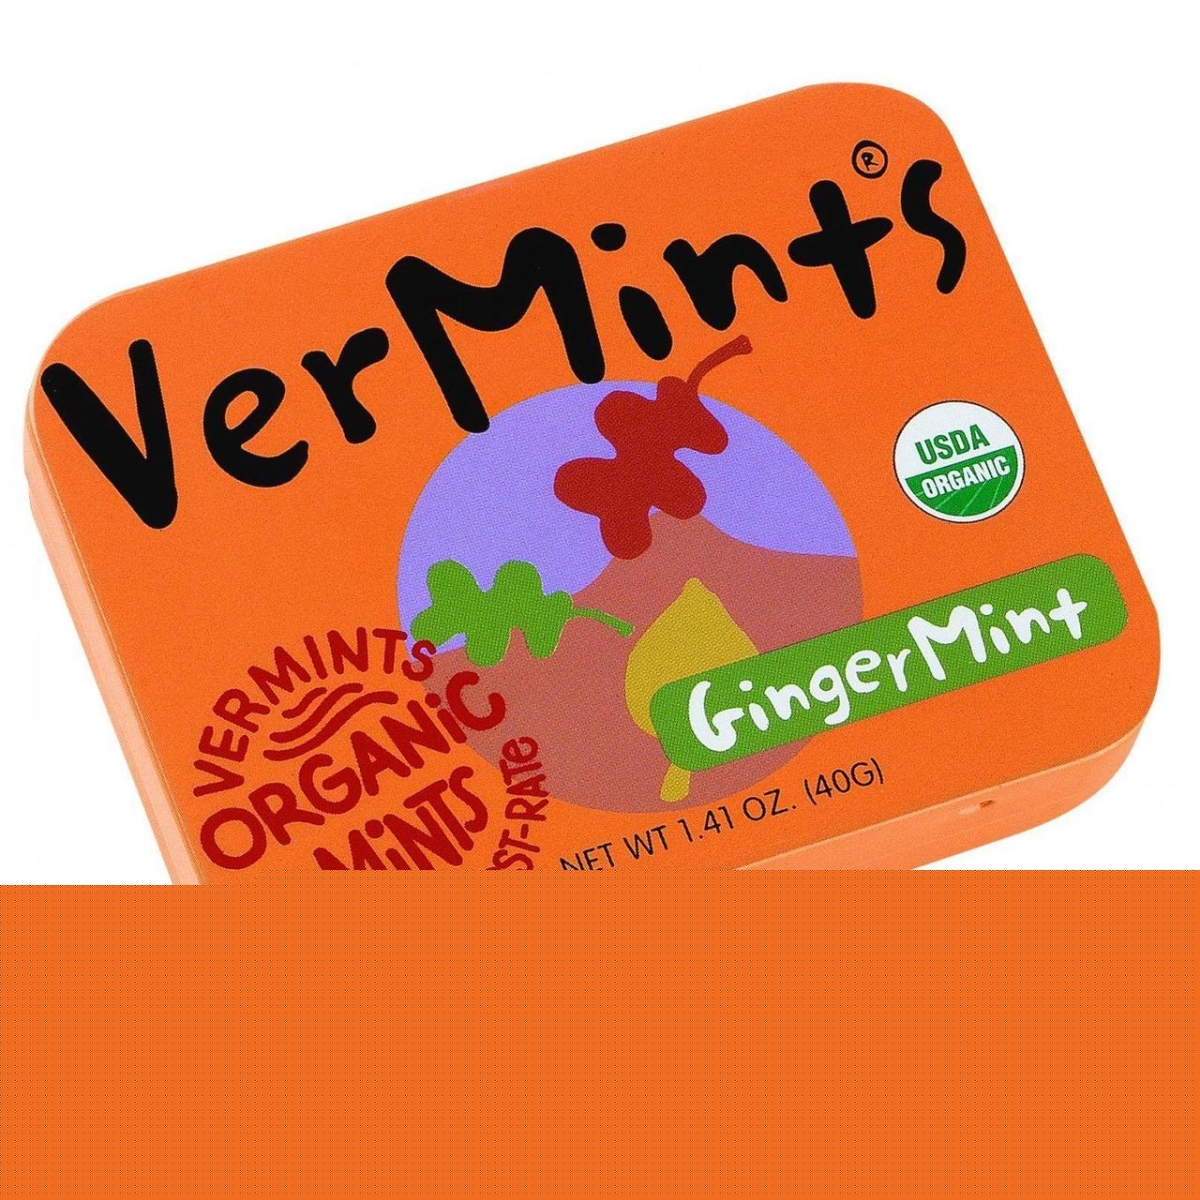 Hg0445957 1.41 Oz Breath Mints All Natural, Gingermint - Case Of 6